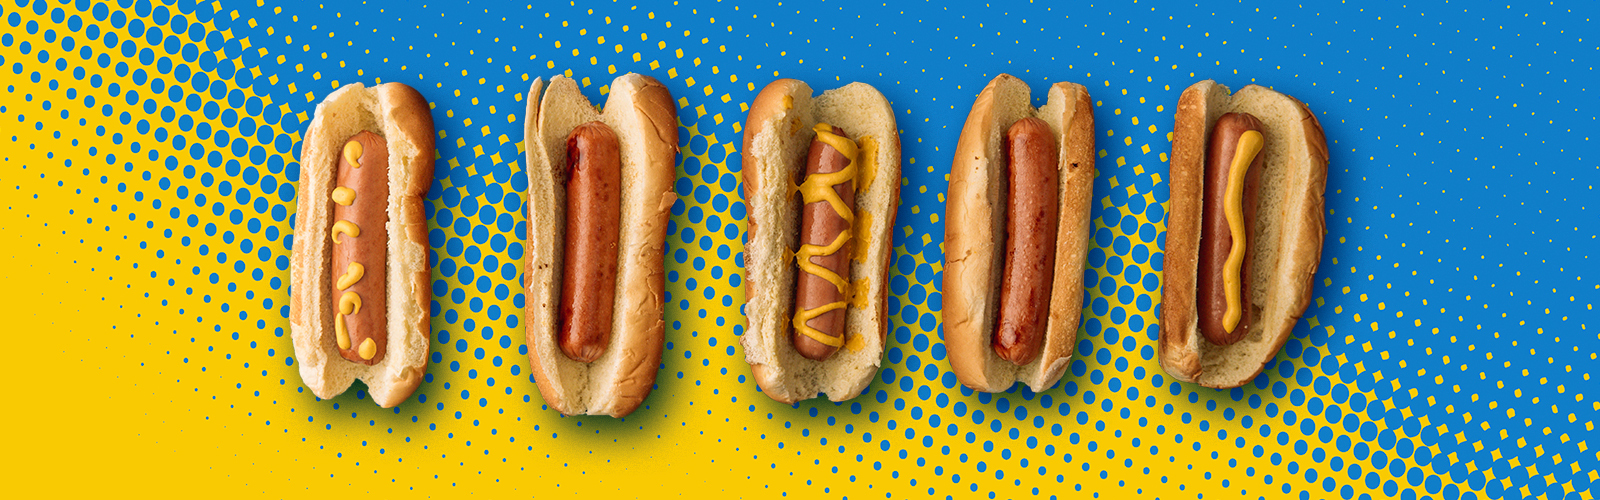 hot Dogs Graphic